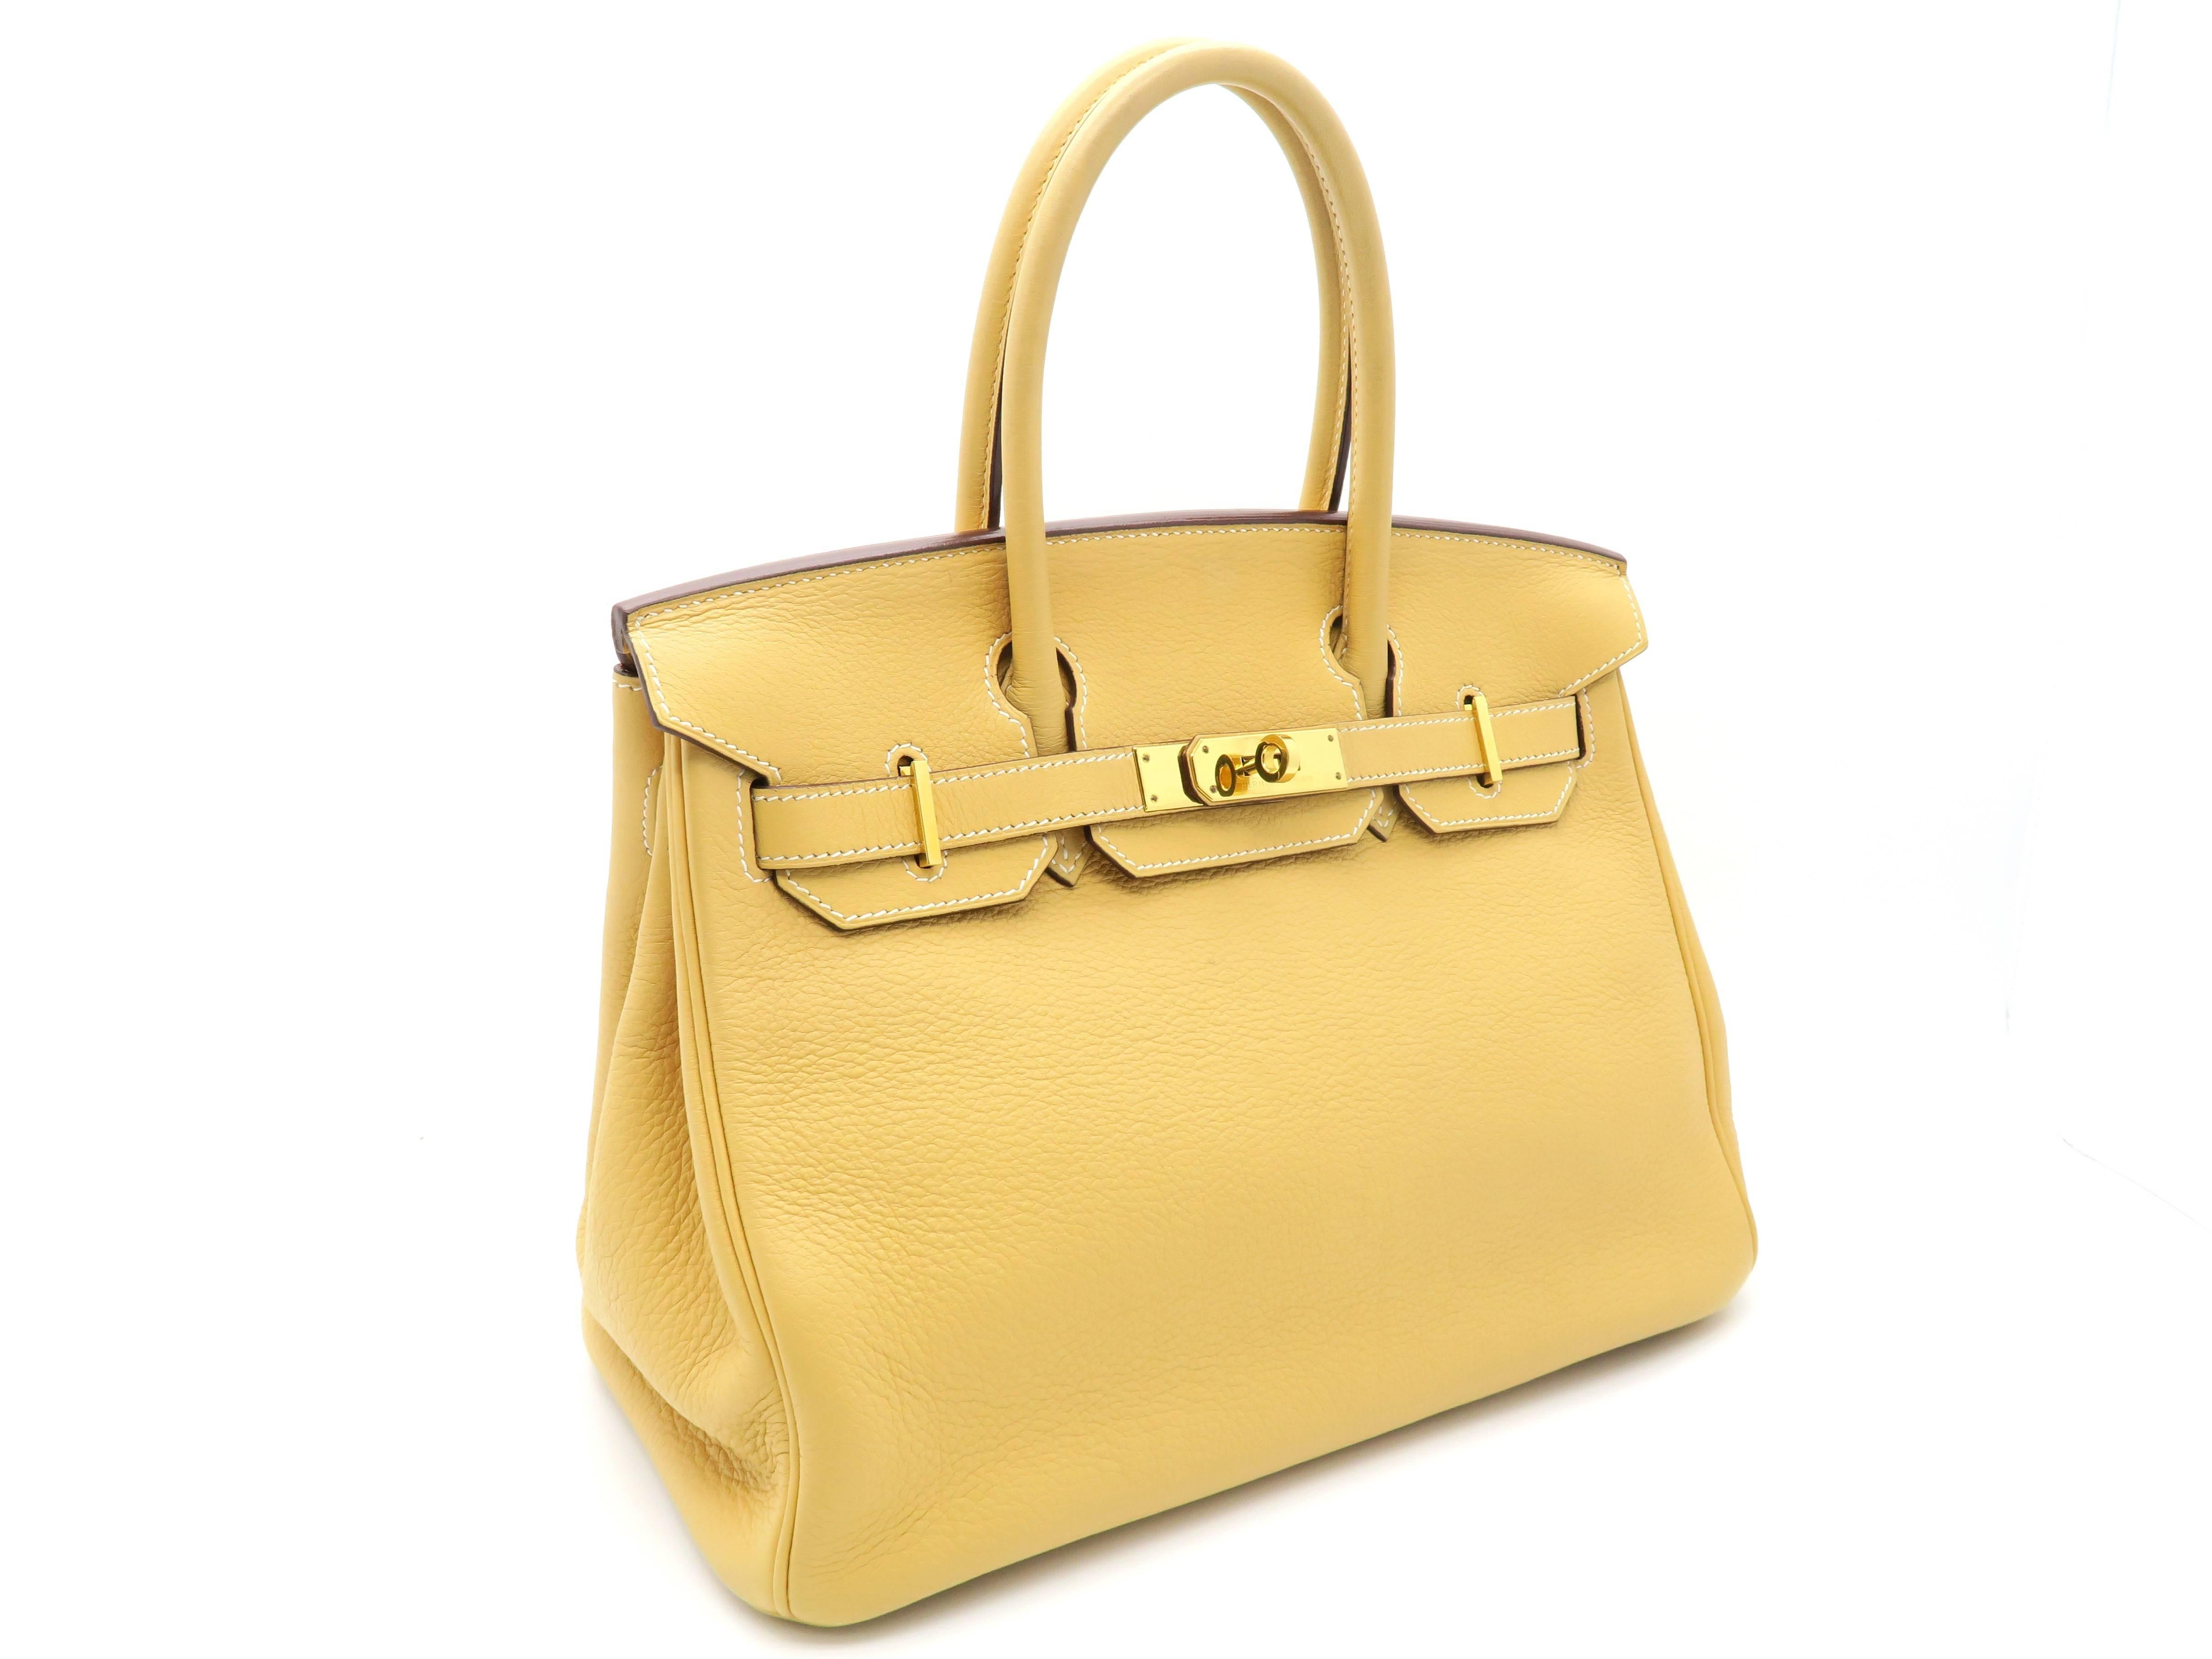 Color: Yellow / Natural Sable (designer color)
Material: Clemence Leather 

Condition:
Rank B
Overall: Fair. Few defects
Surface: Minor Scratches
Corners: Minor Scratches & Stains
Edges: Minor Scratches
Handles/Straps: Minor Scratches